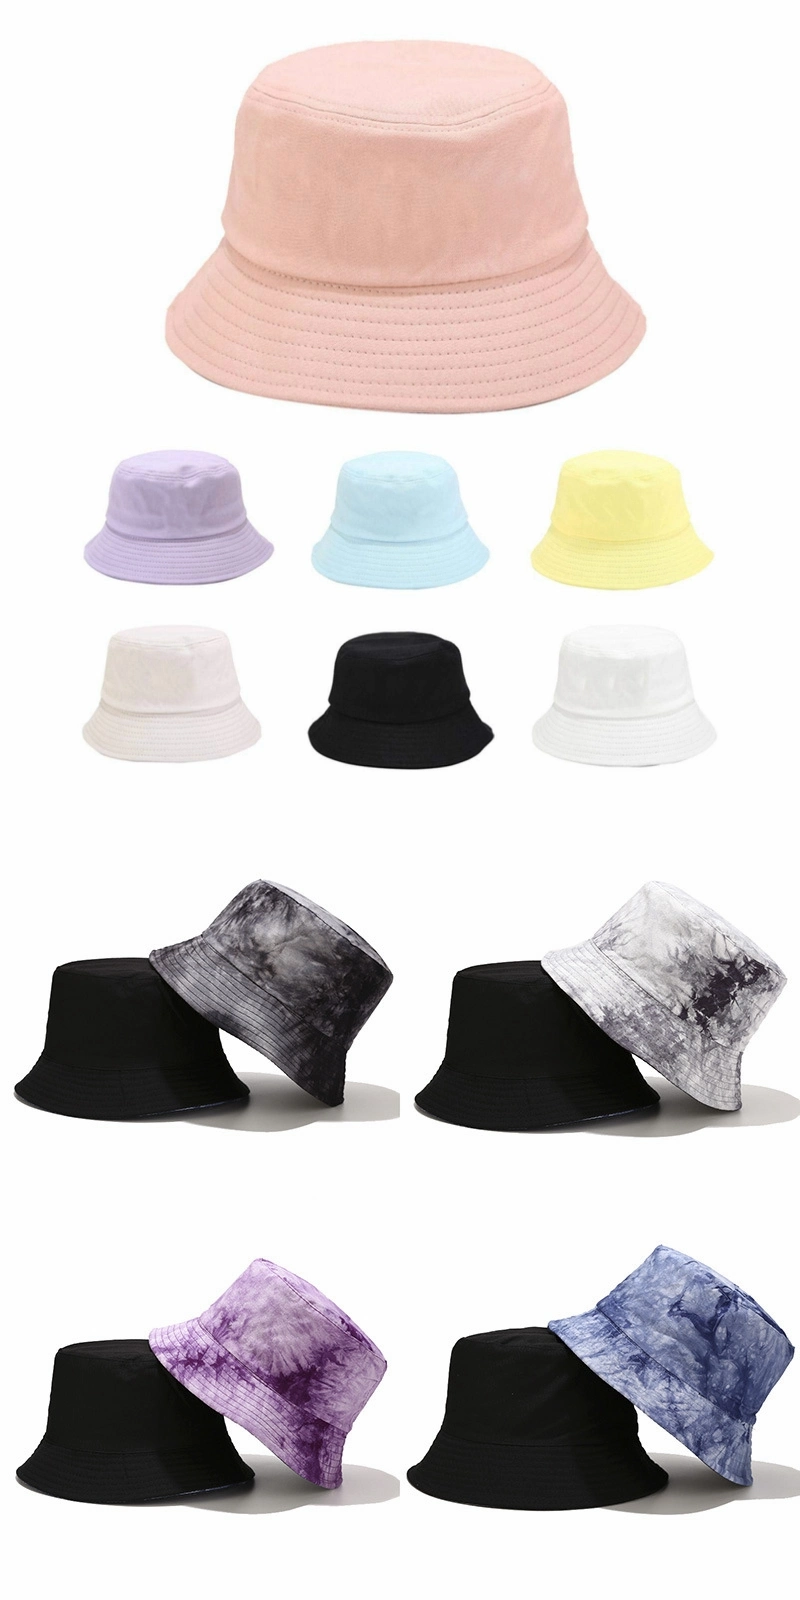 Wholesale 100% Cotton Good Quality Terry Towel Bucket Hat or Embroidery Your Custom Logo